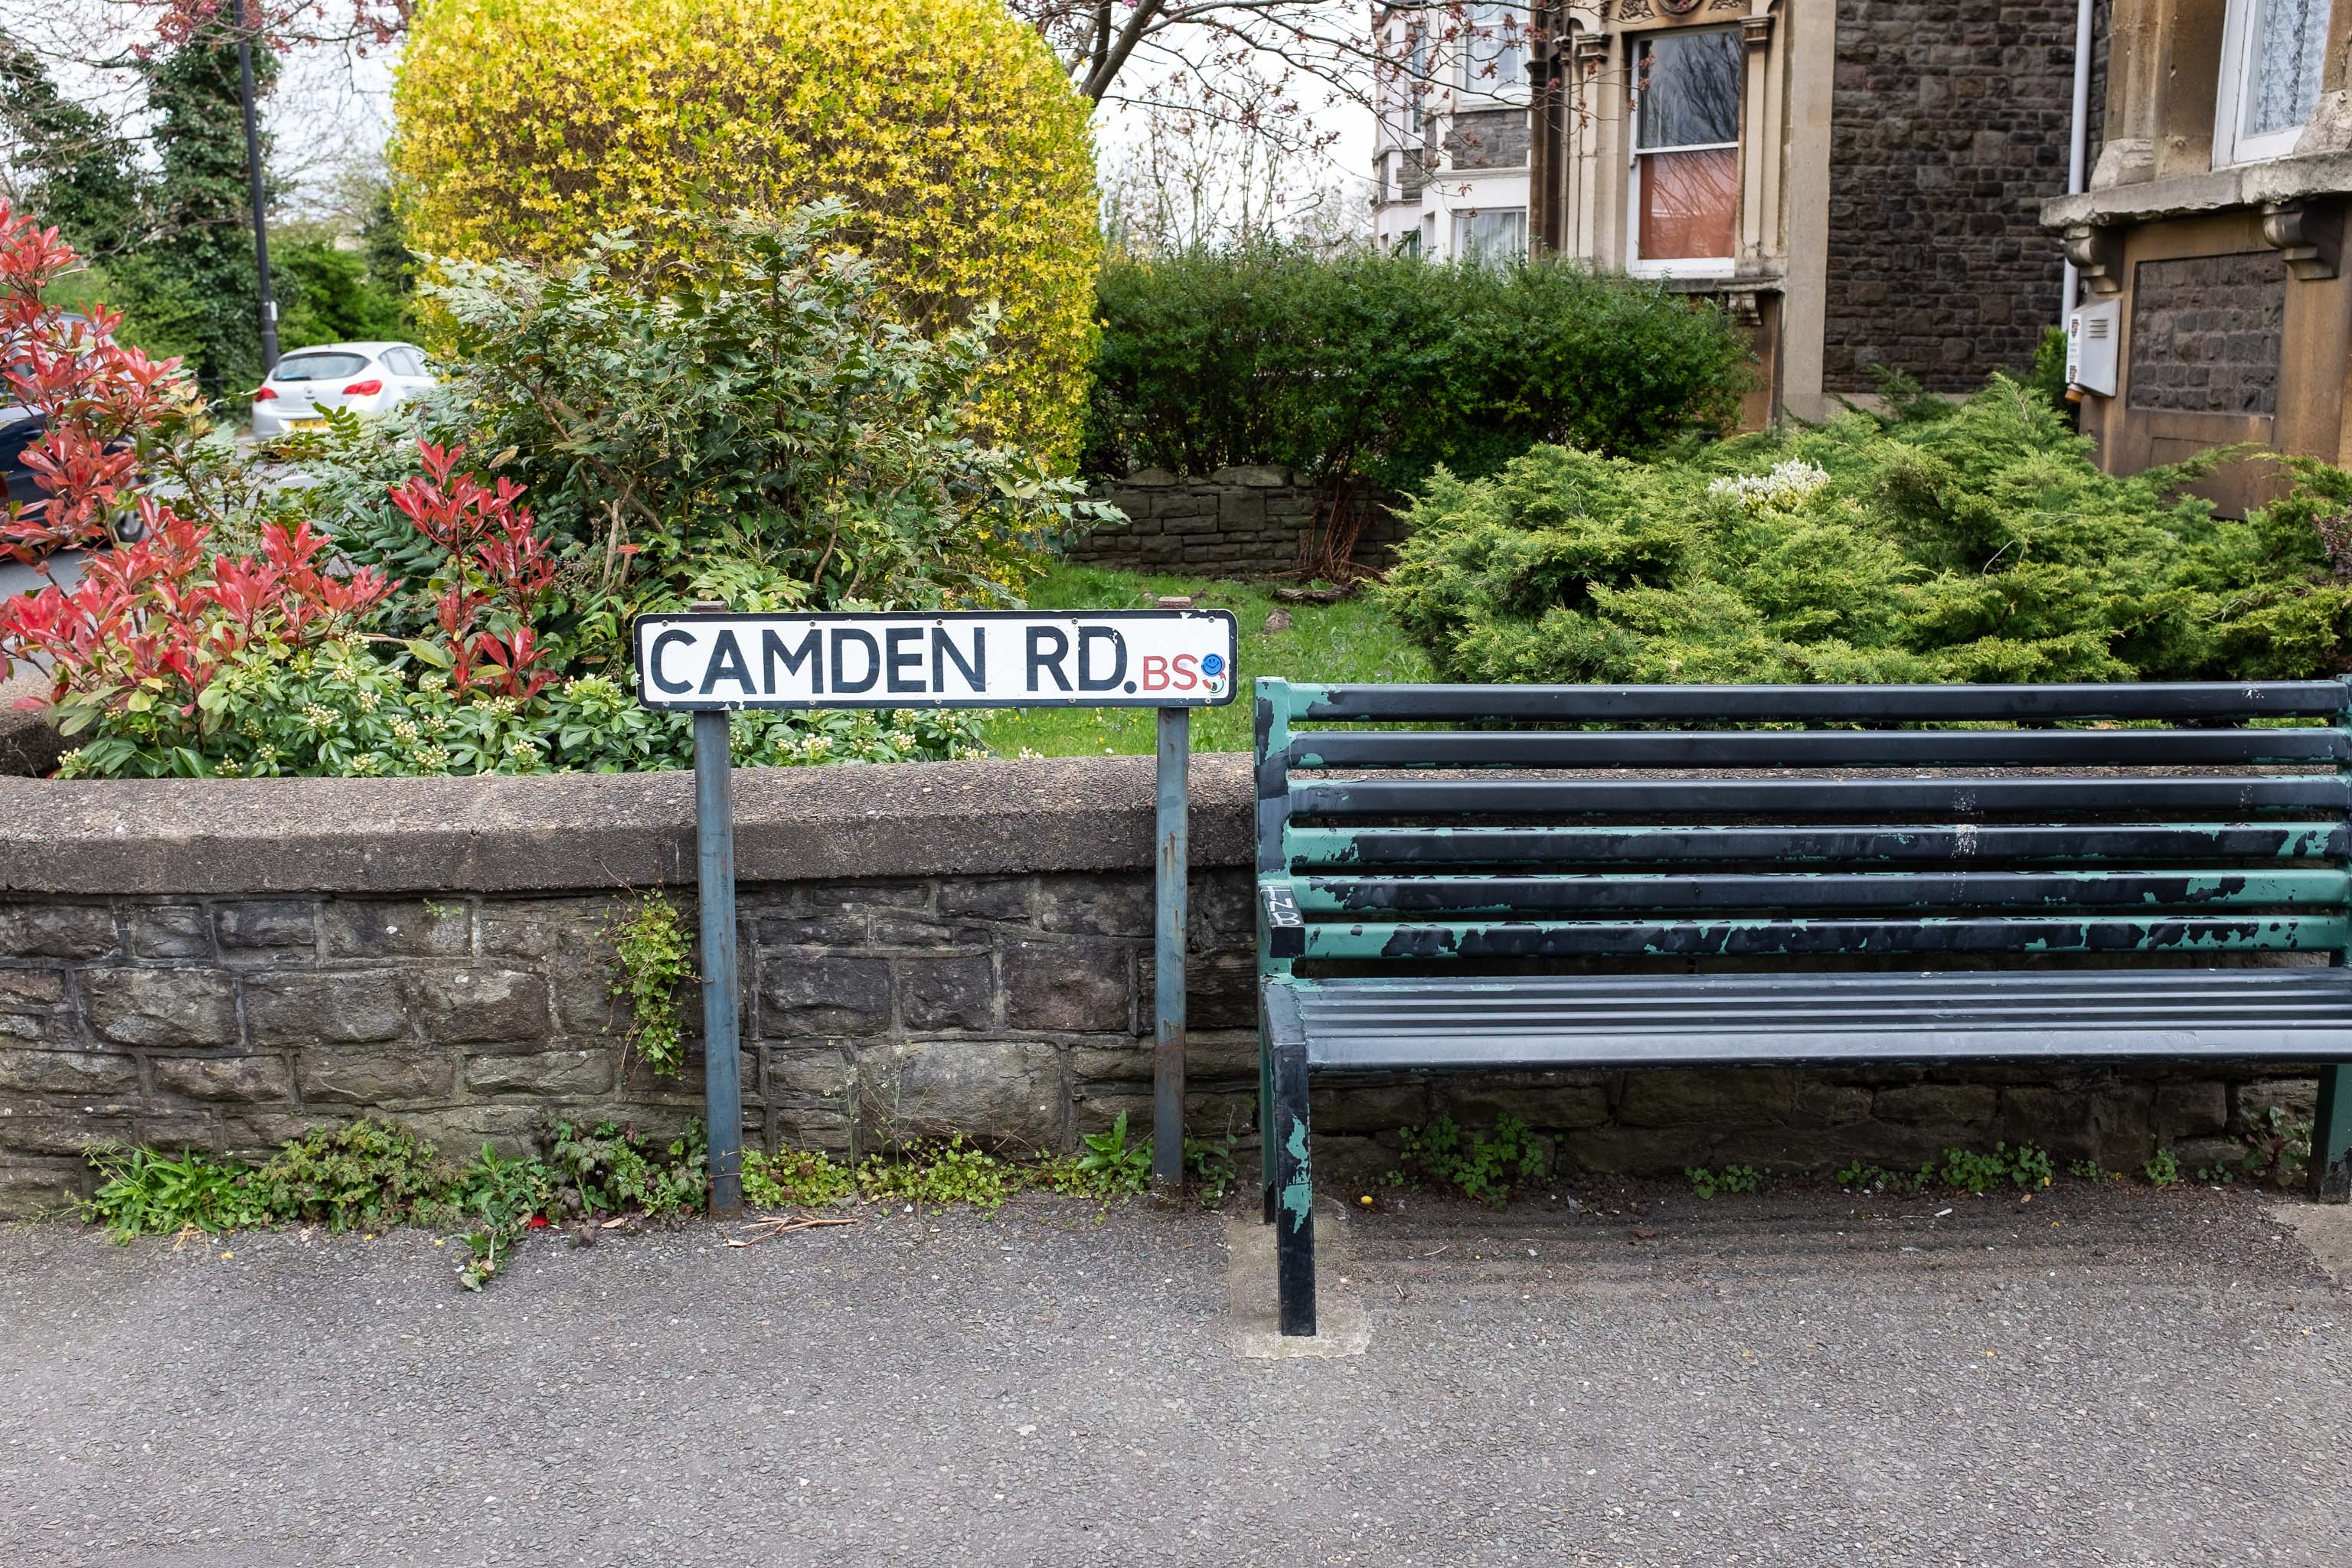 Camden Road and Bench
24 photos in and I've finally reached my ostensible target for this trip, starting with Camden Road.
